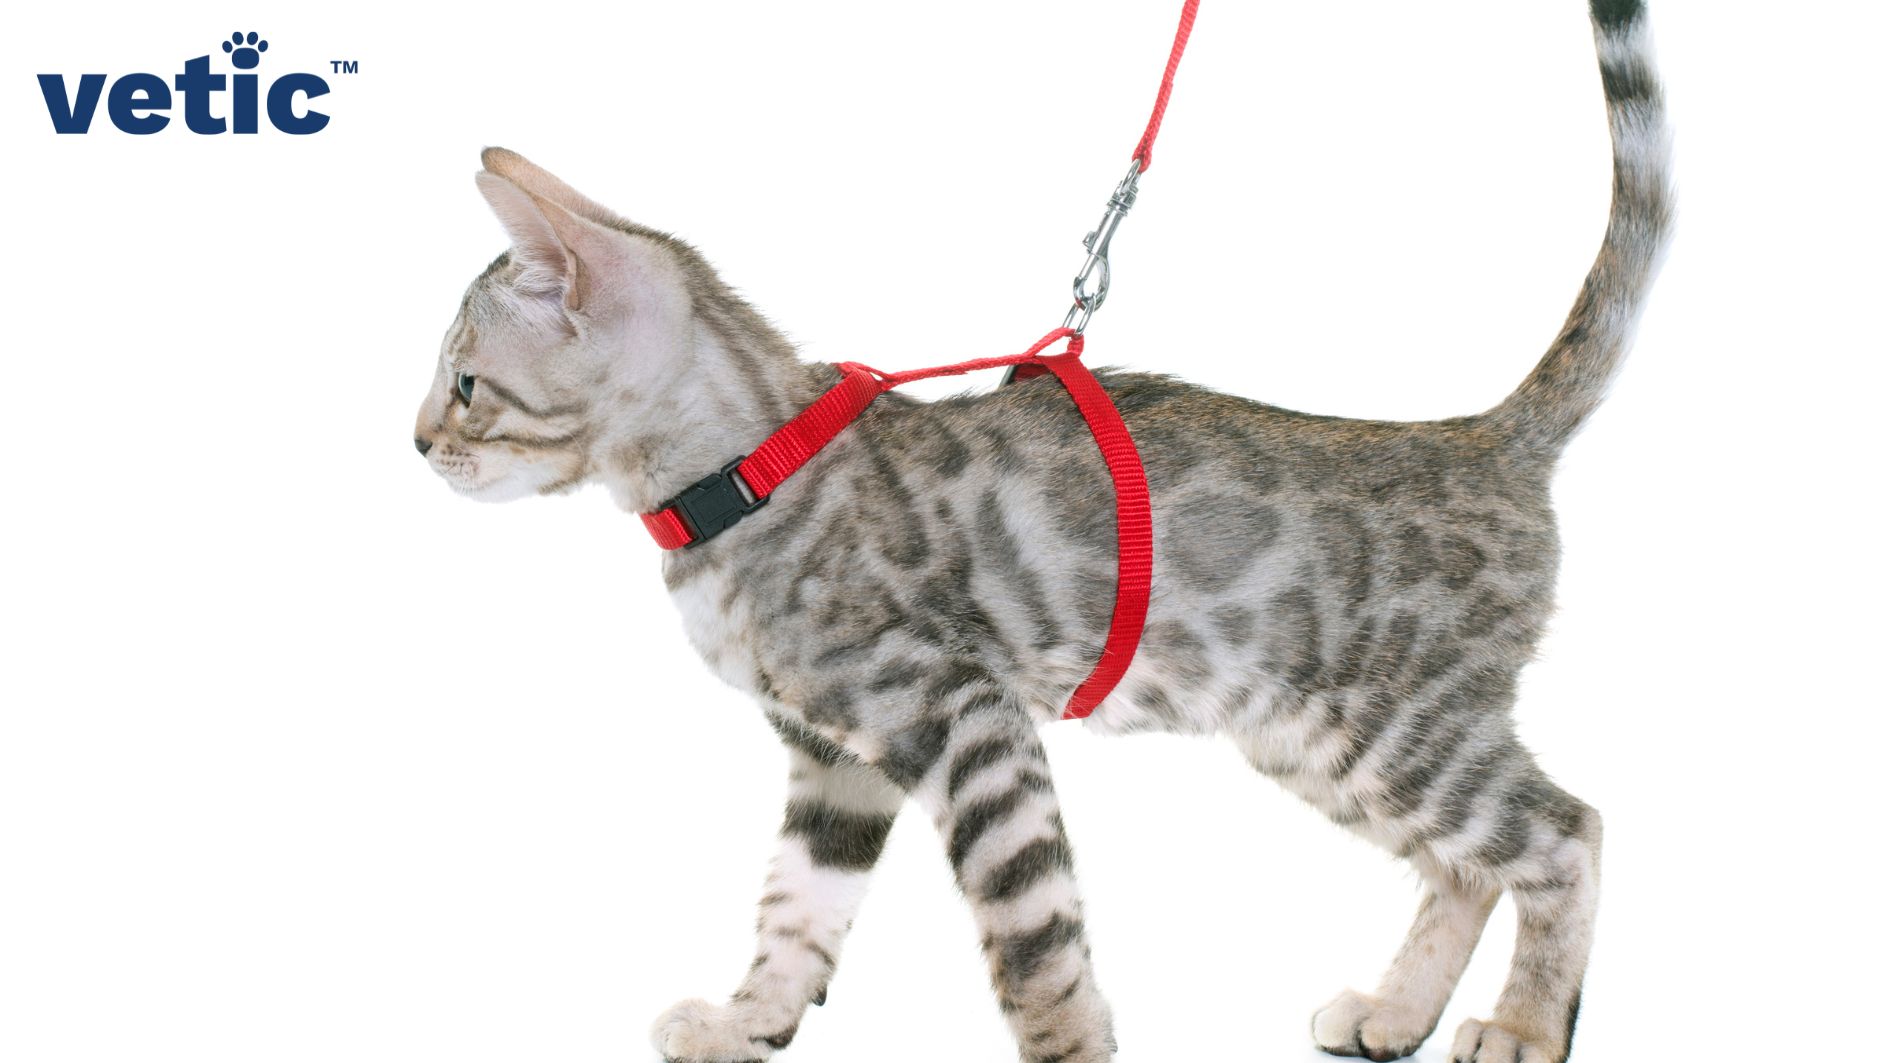 Grey Bengal Cat in a red harness and leash